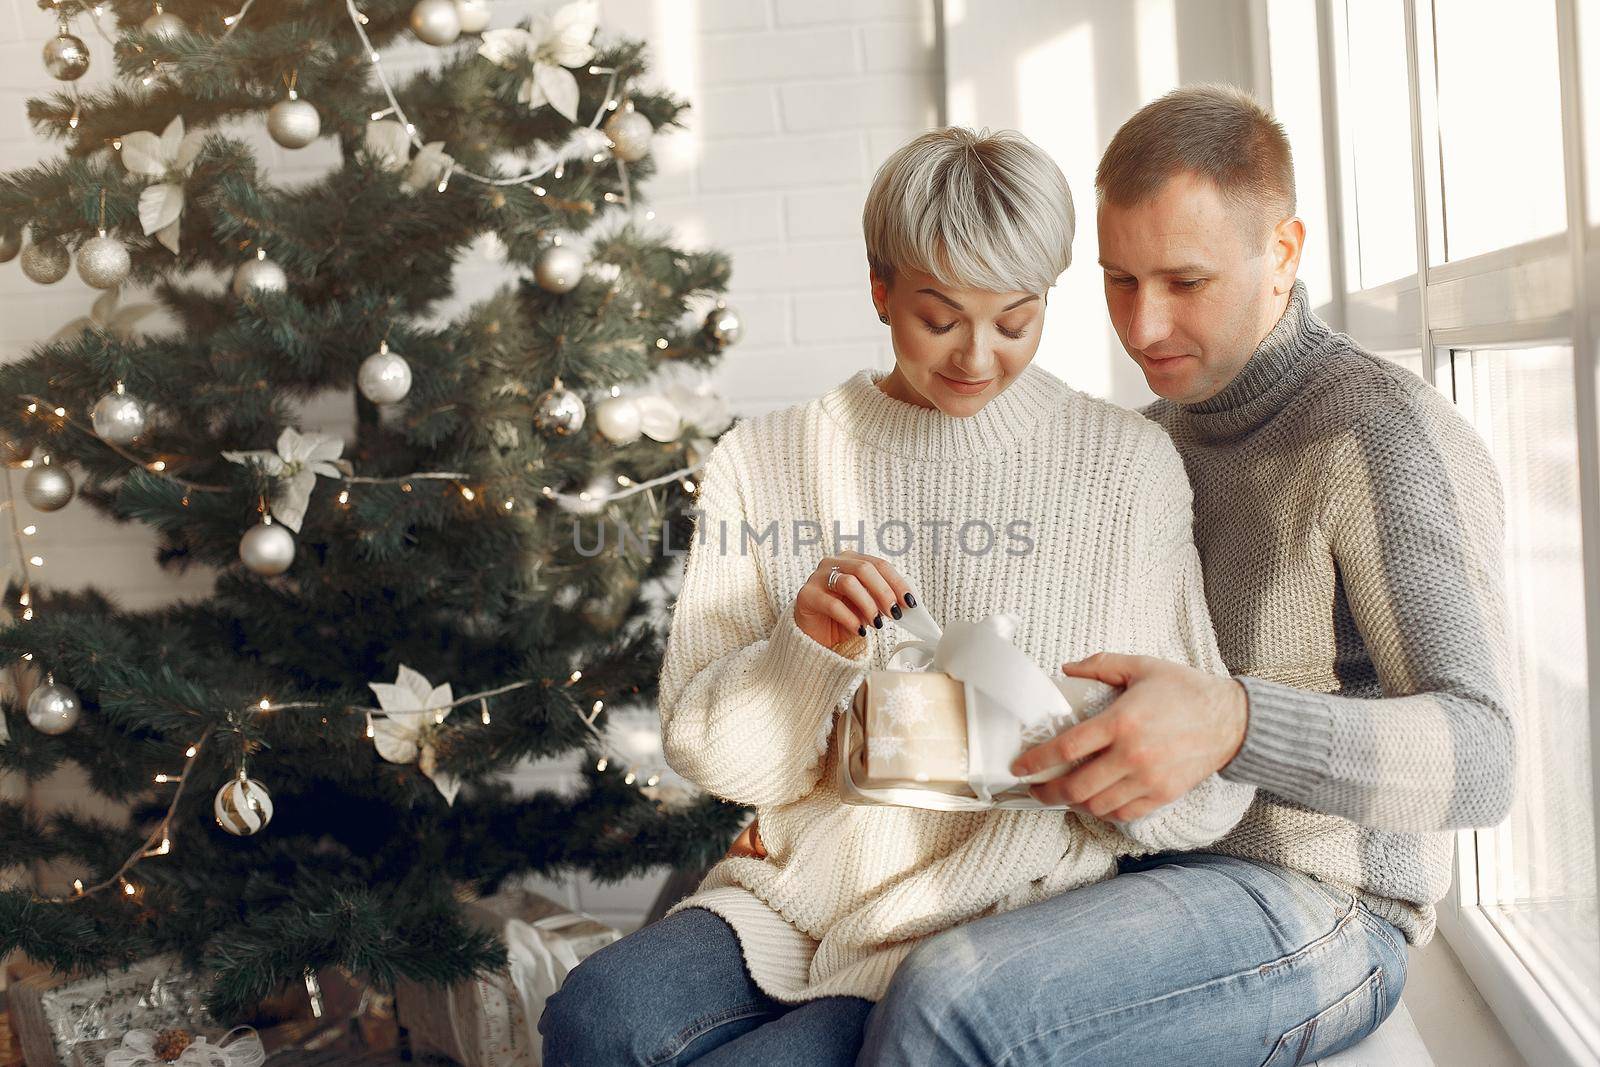 Family at home. Couple near christmas decorations. Woman in a gray sweater.